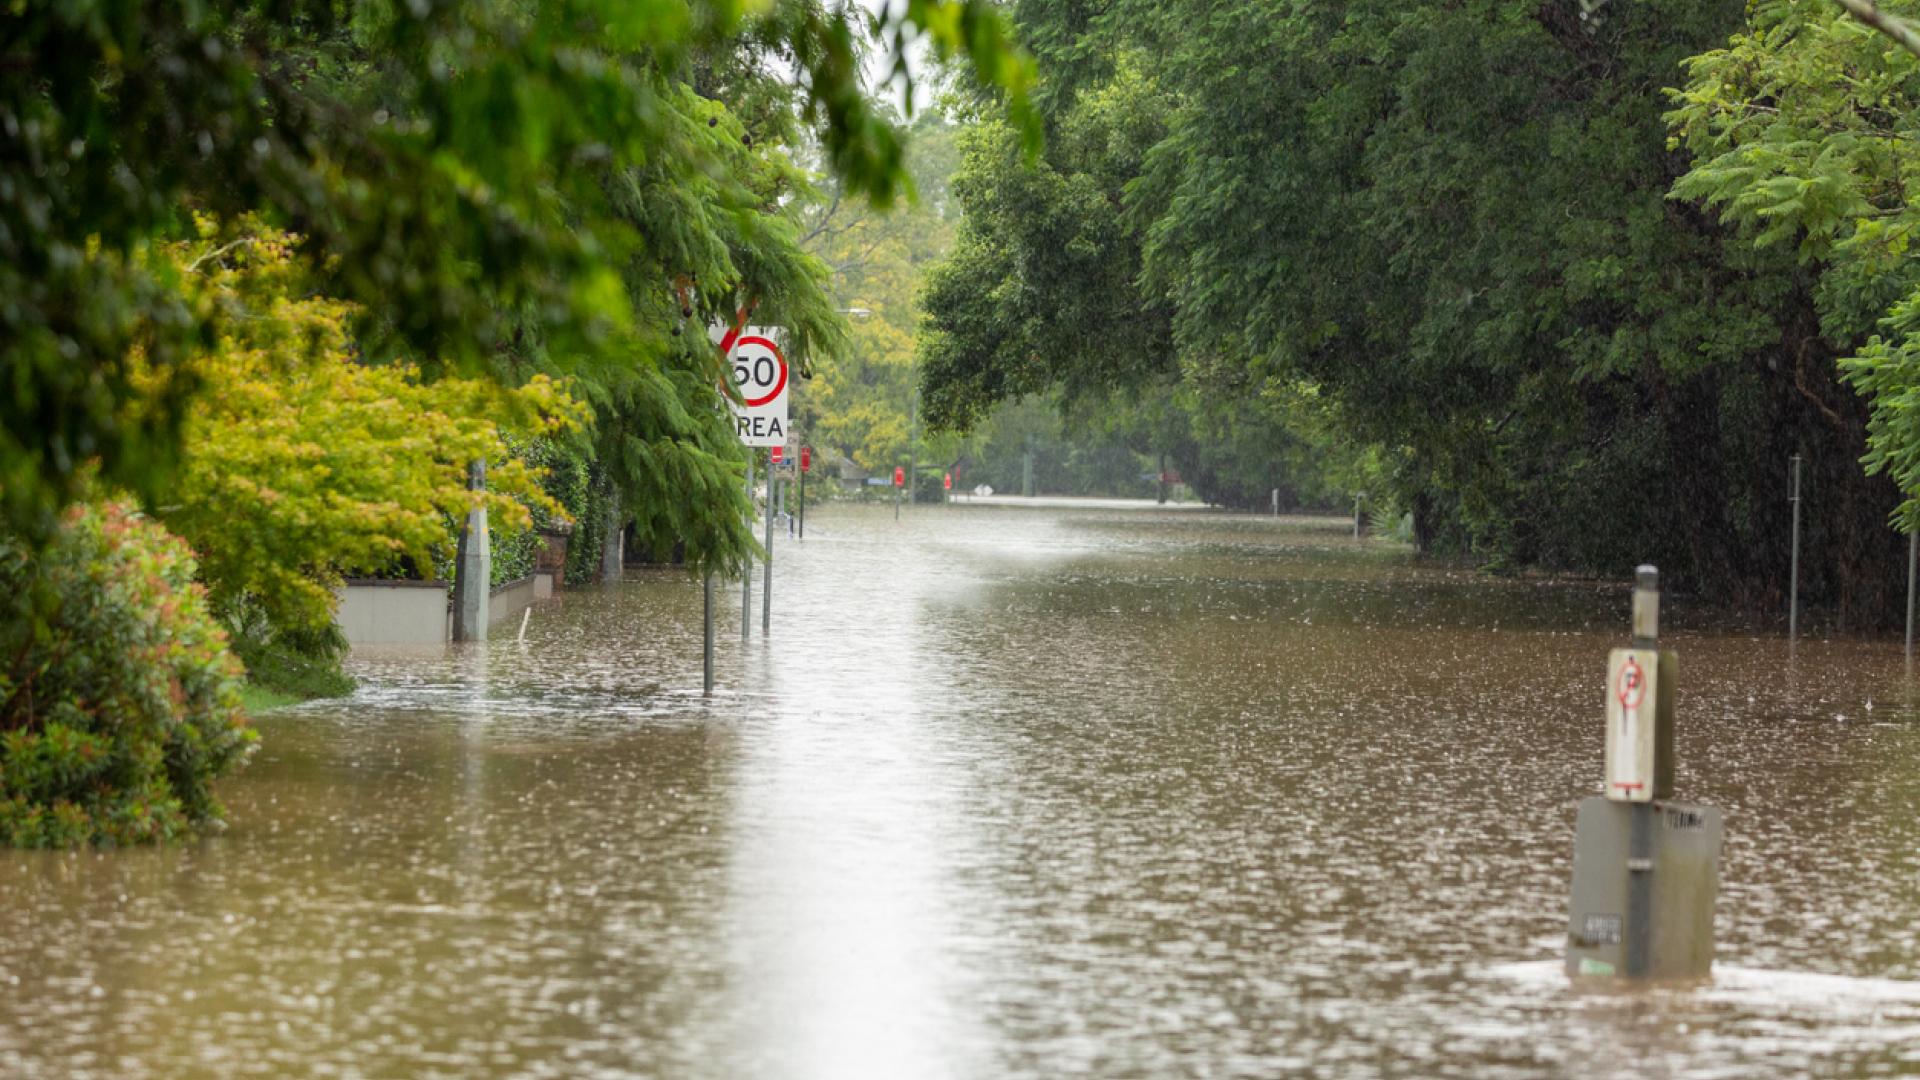 A leafy suburban road flooded with brown water, the top of a 50km/ph speed limit sign is visible.